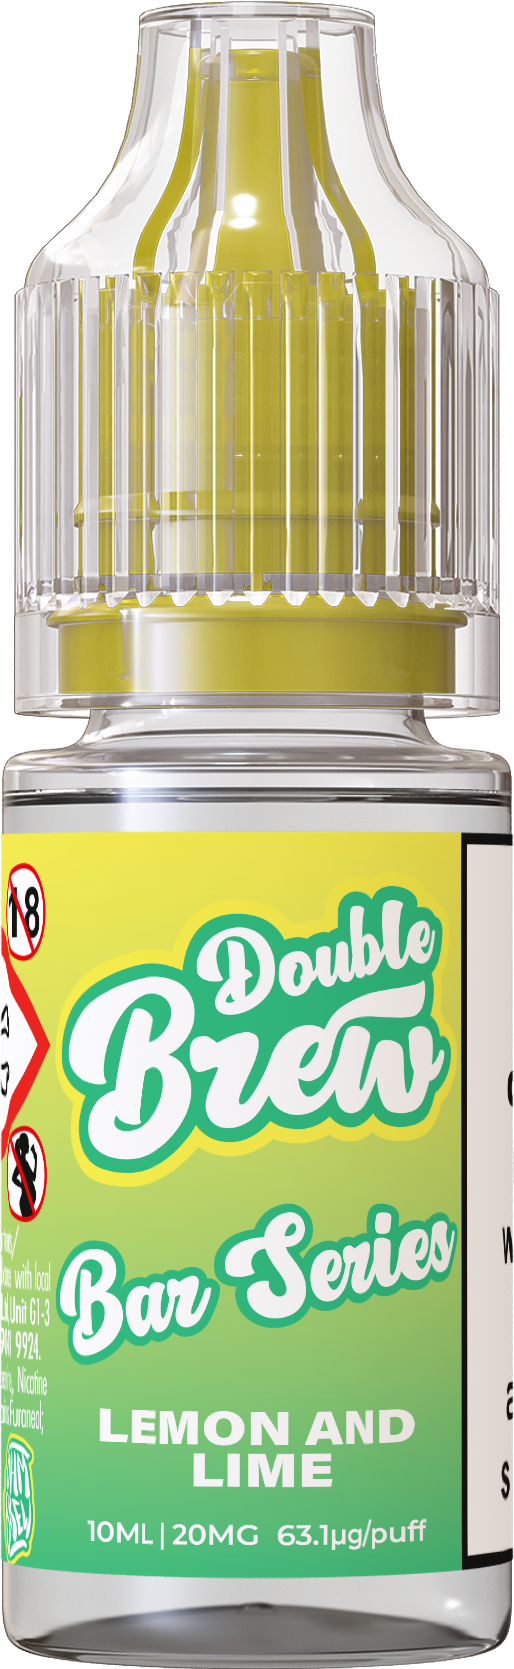 Double Brew - Bar Series - Lemon and Lime 10ml (Mix & Match 3 x £10)